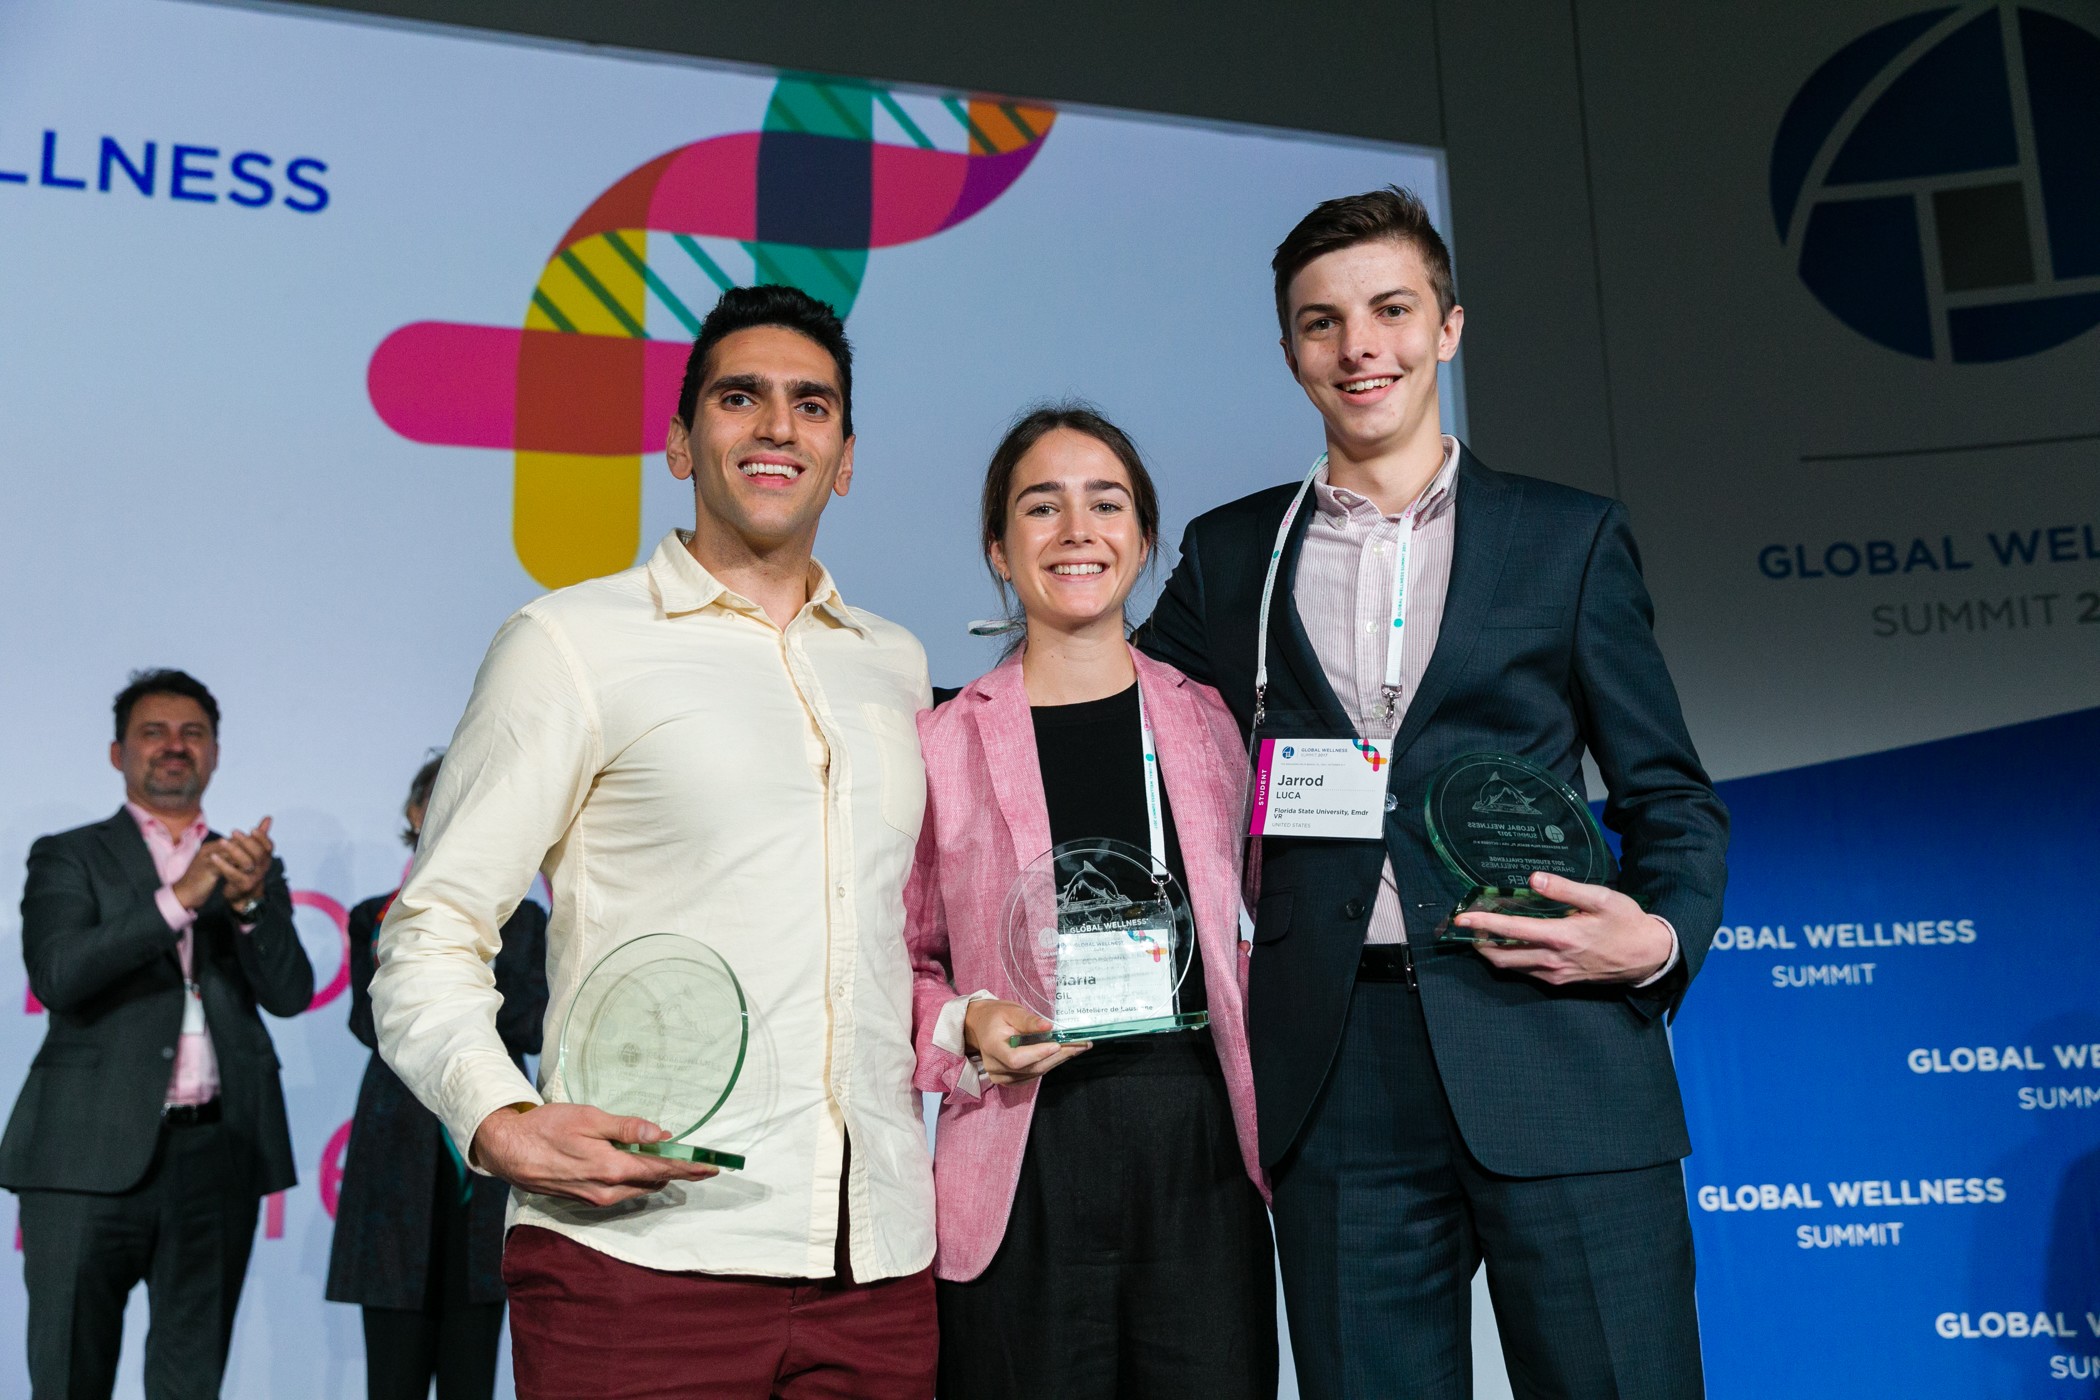 The “Shark Tank of Wellness” Finalists at the 2017 Global Wellness Summit. From left to right: Mikey Ahdoot (University of Southern California, USA), Jarrod Luca (Florida State University, USA), and M